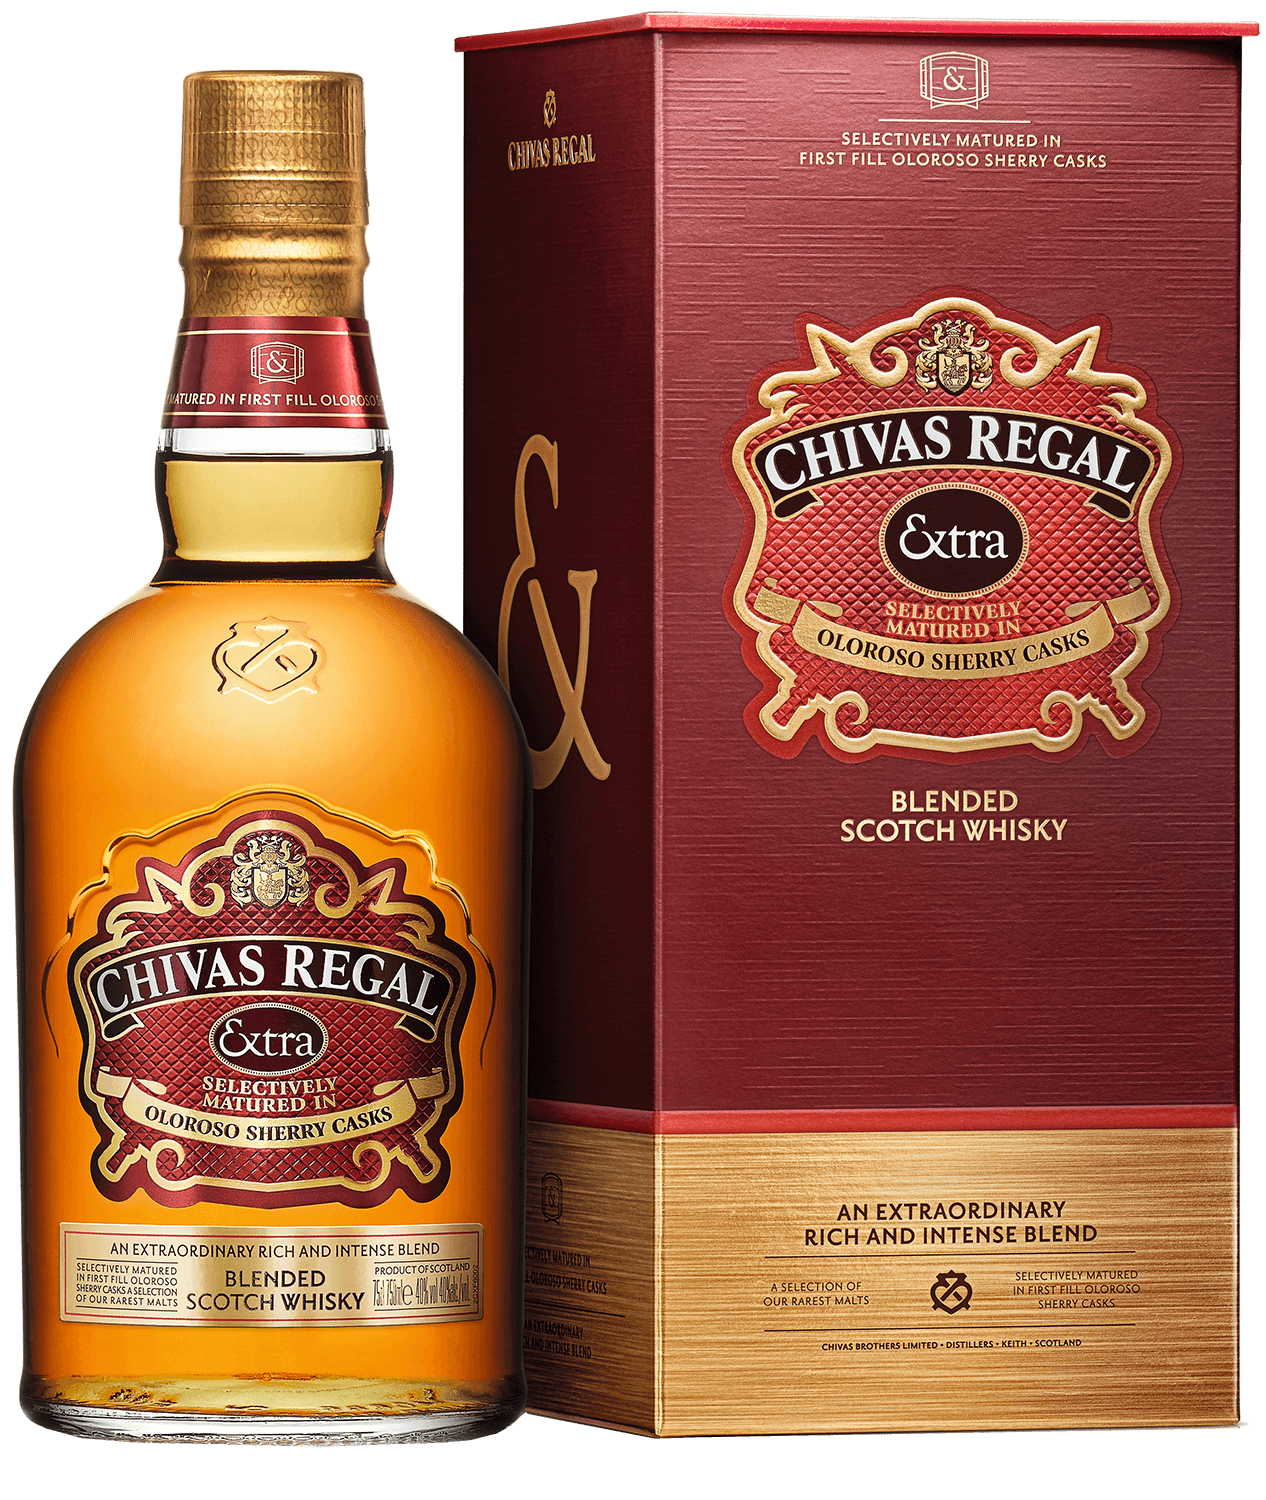 Chivas Regal Extra Blended Scotch Whisky (gift box) chivas regal blended scotch whisky 25 y o gift box